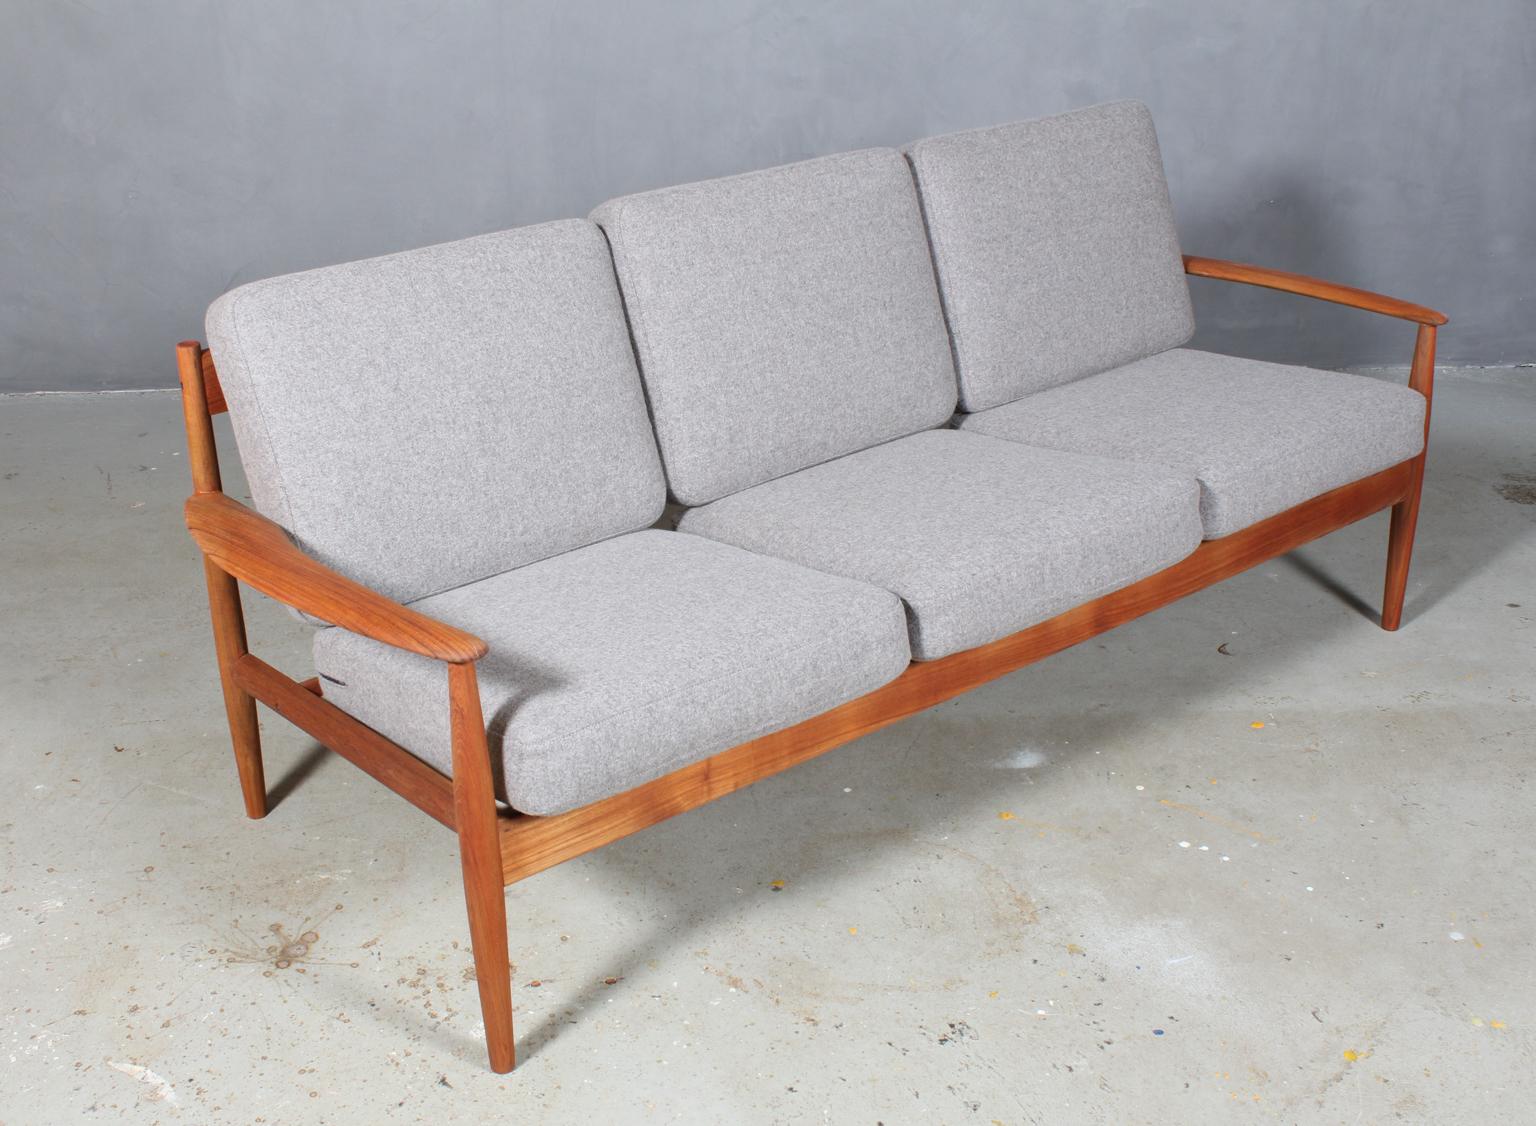 Ole Wanscher three seater sofa with new upholstered cushions in 100 % New Zealand wool.

Frame of solid teak.

Model 128, made by France & Son, 1960s.

Matching set of lounge chairs avaiable.